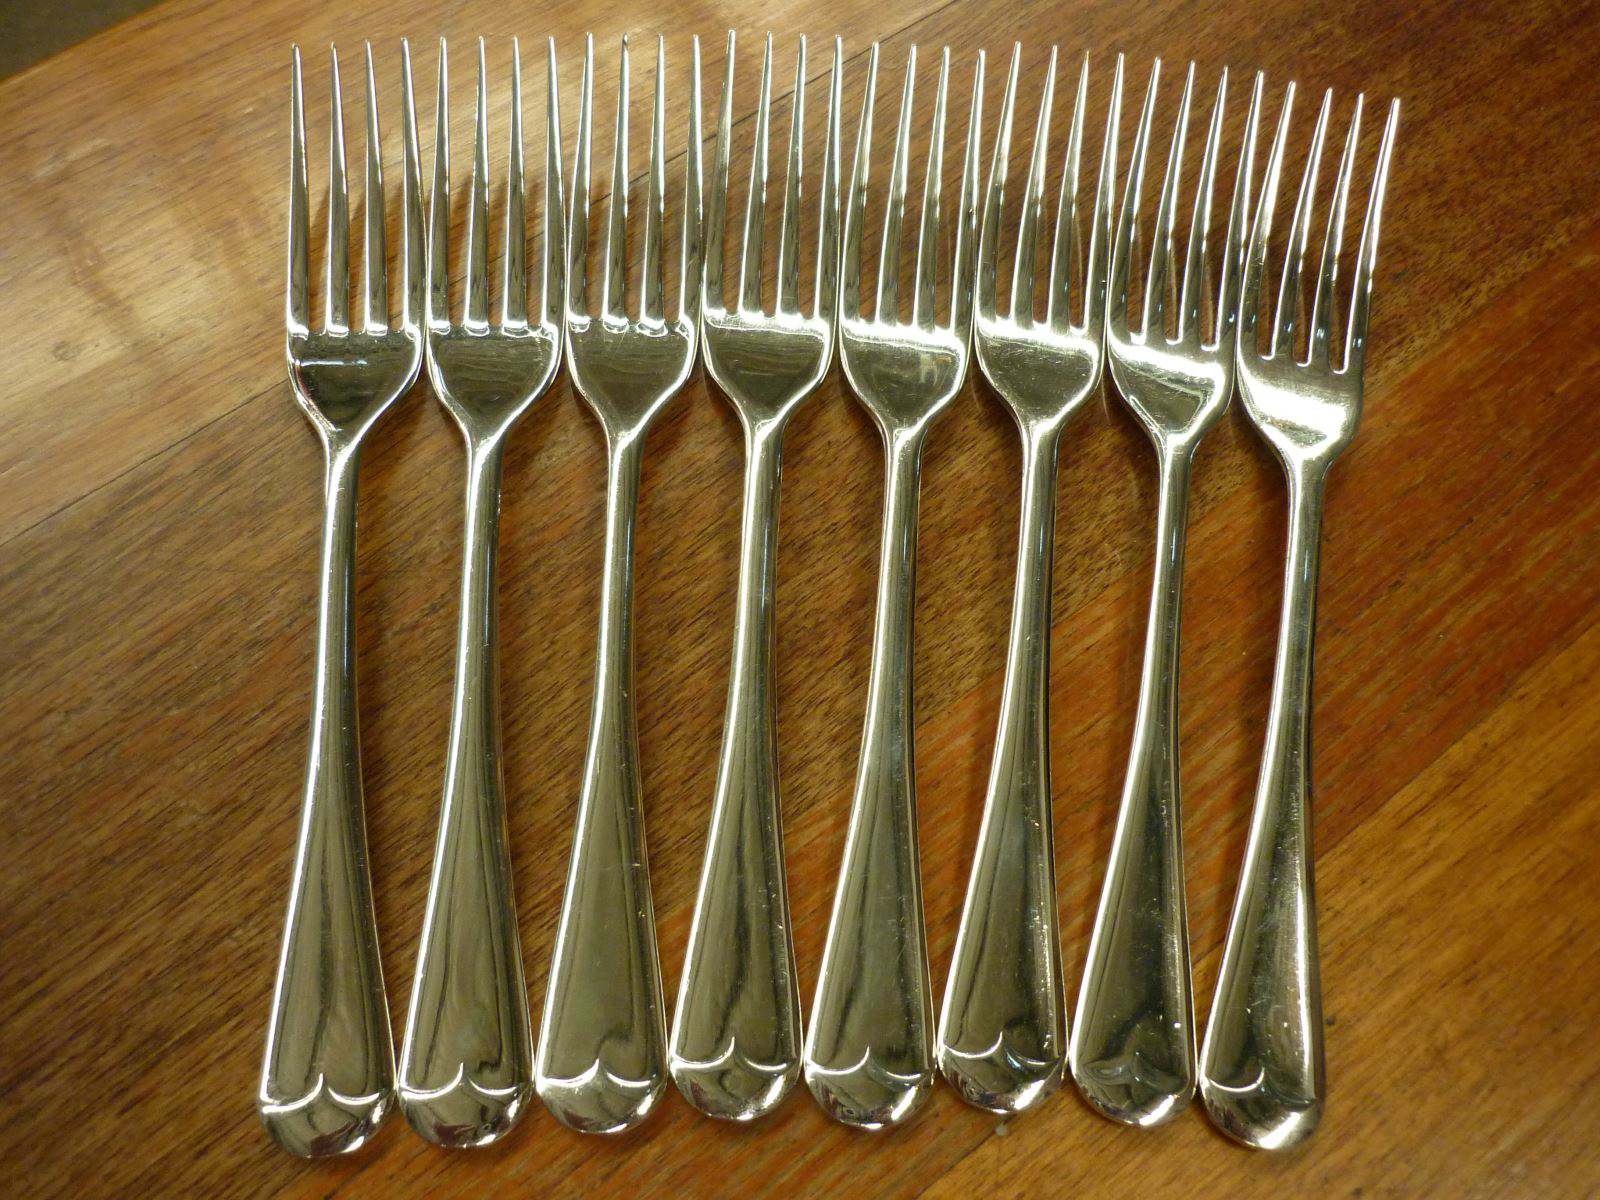 Cutlery. Quality Silver Plated Dinner Forks, Cleaned & Polished